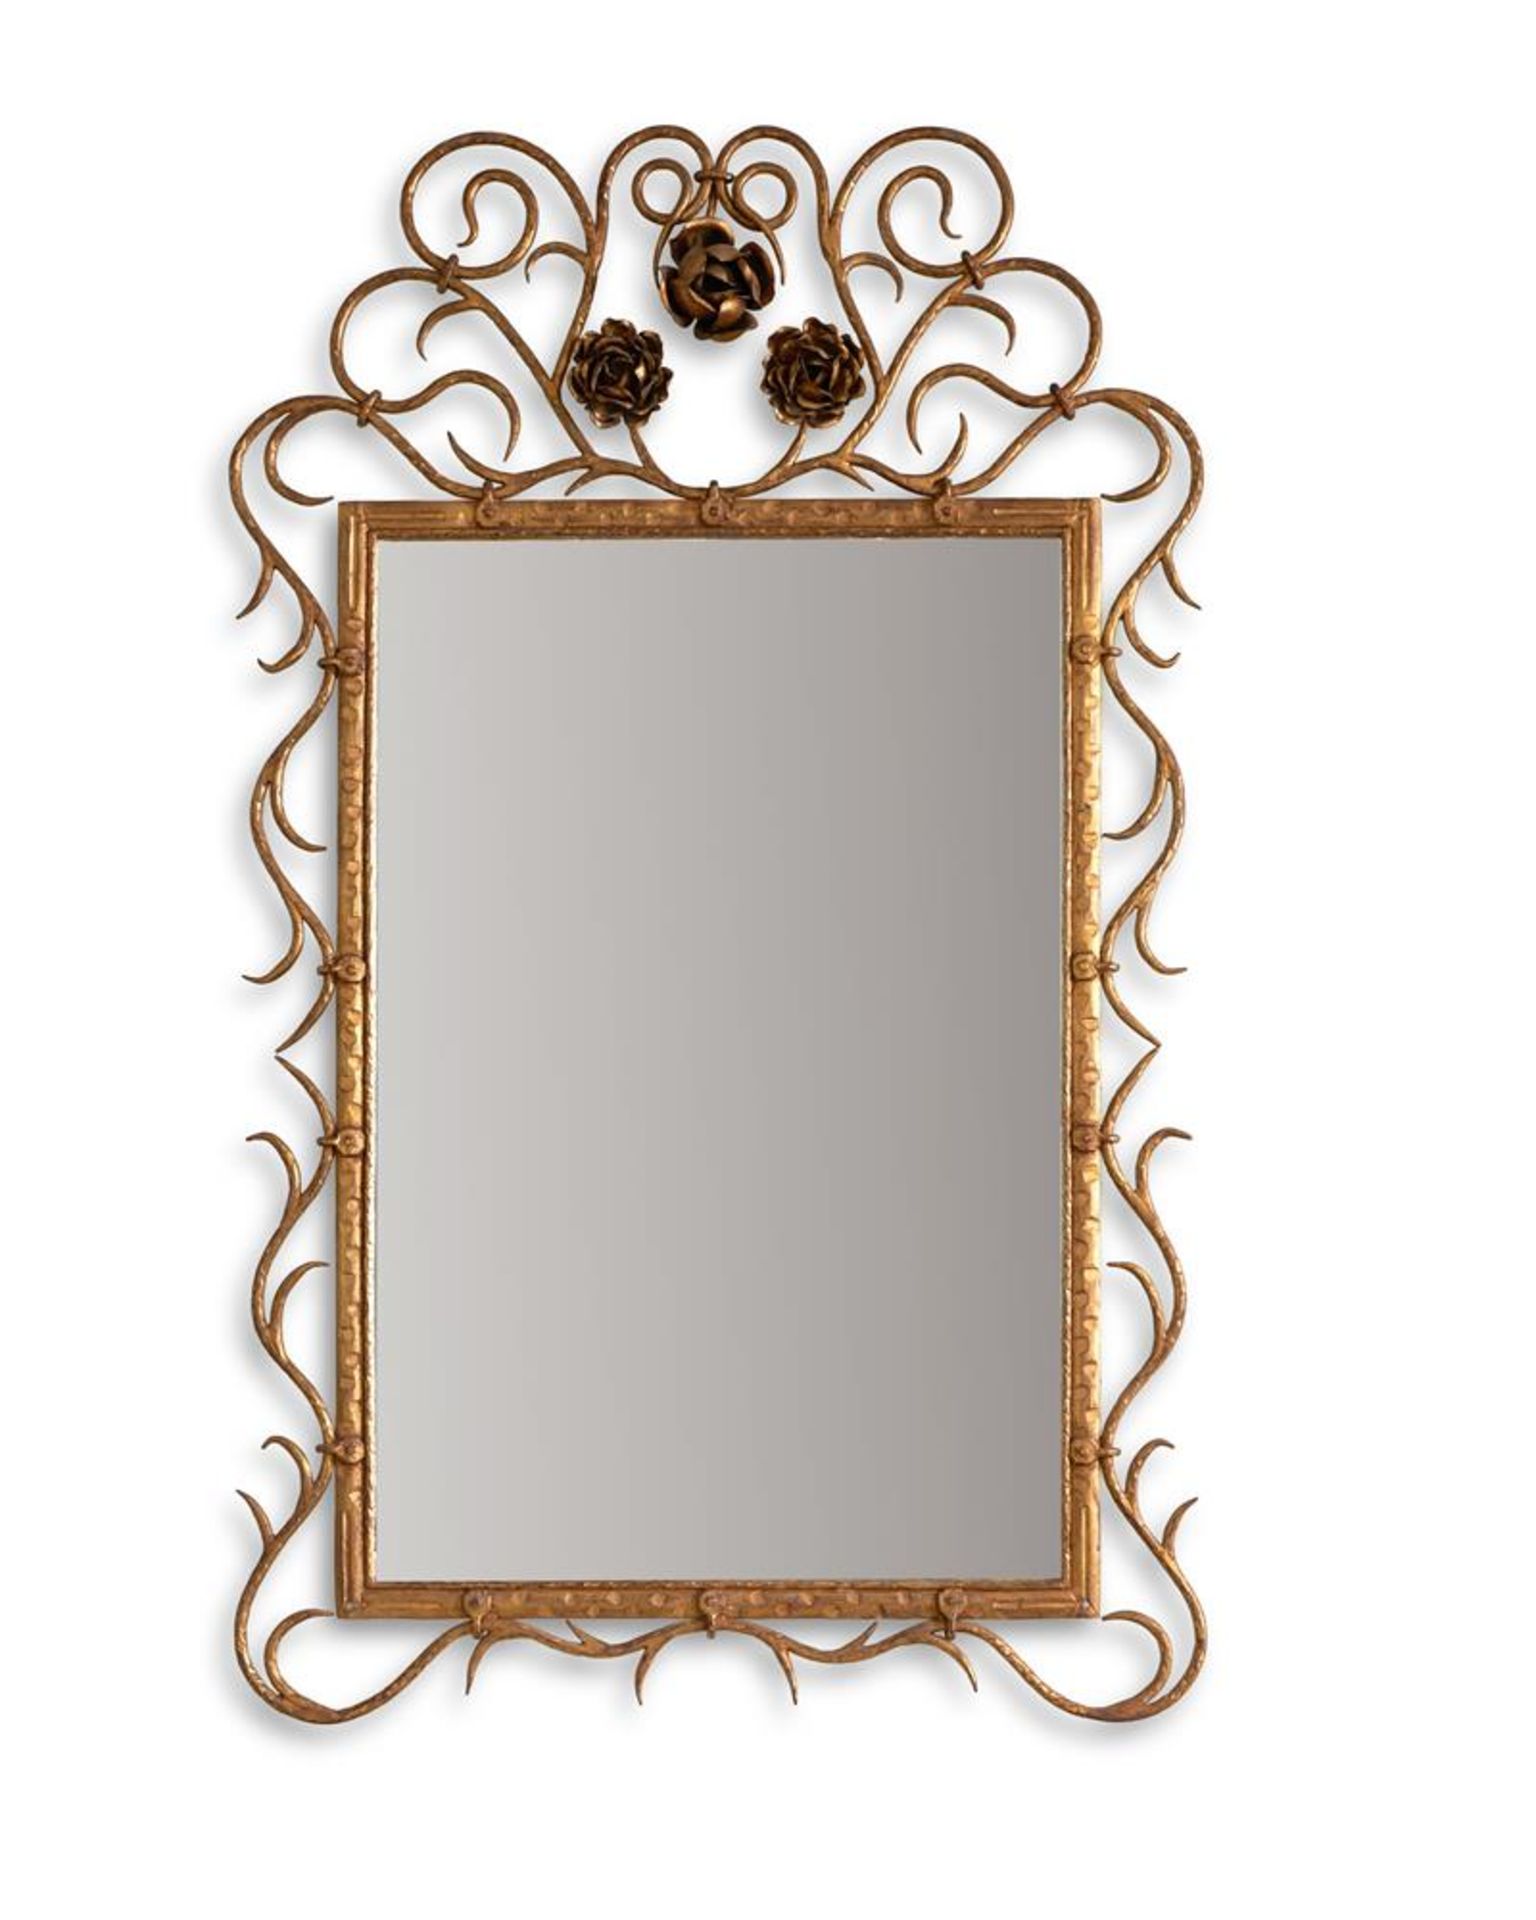 A GILDED WROUGHT IRON MIRROR, 20TH CENTURY